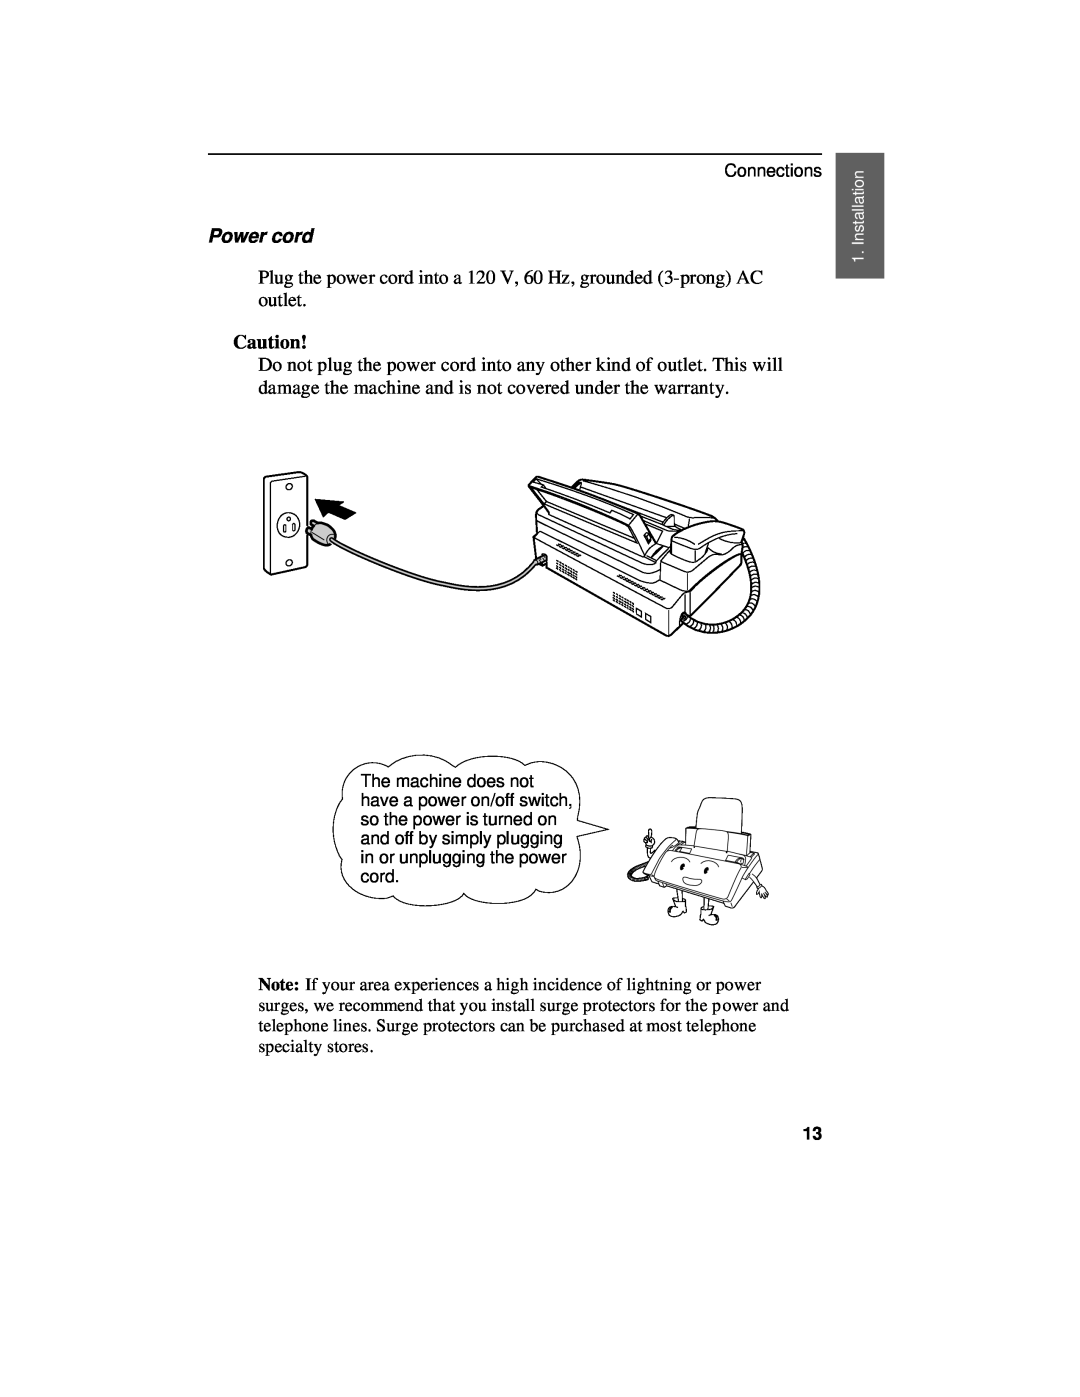 Sharp UX-460 operation manual Power cord, Plug the power cord into a 120 V, 60 Hz, grounded 3-prong AC outlet 